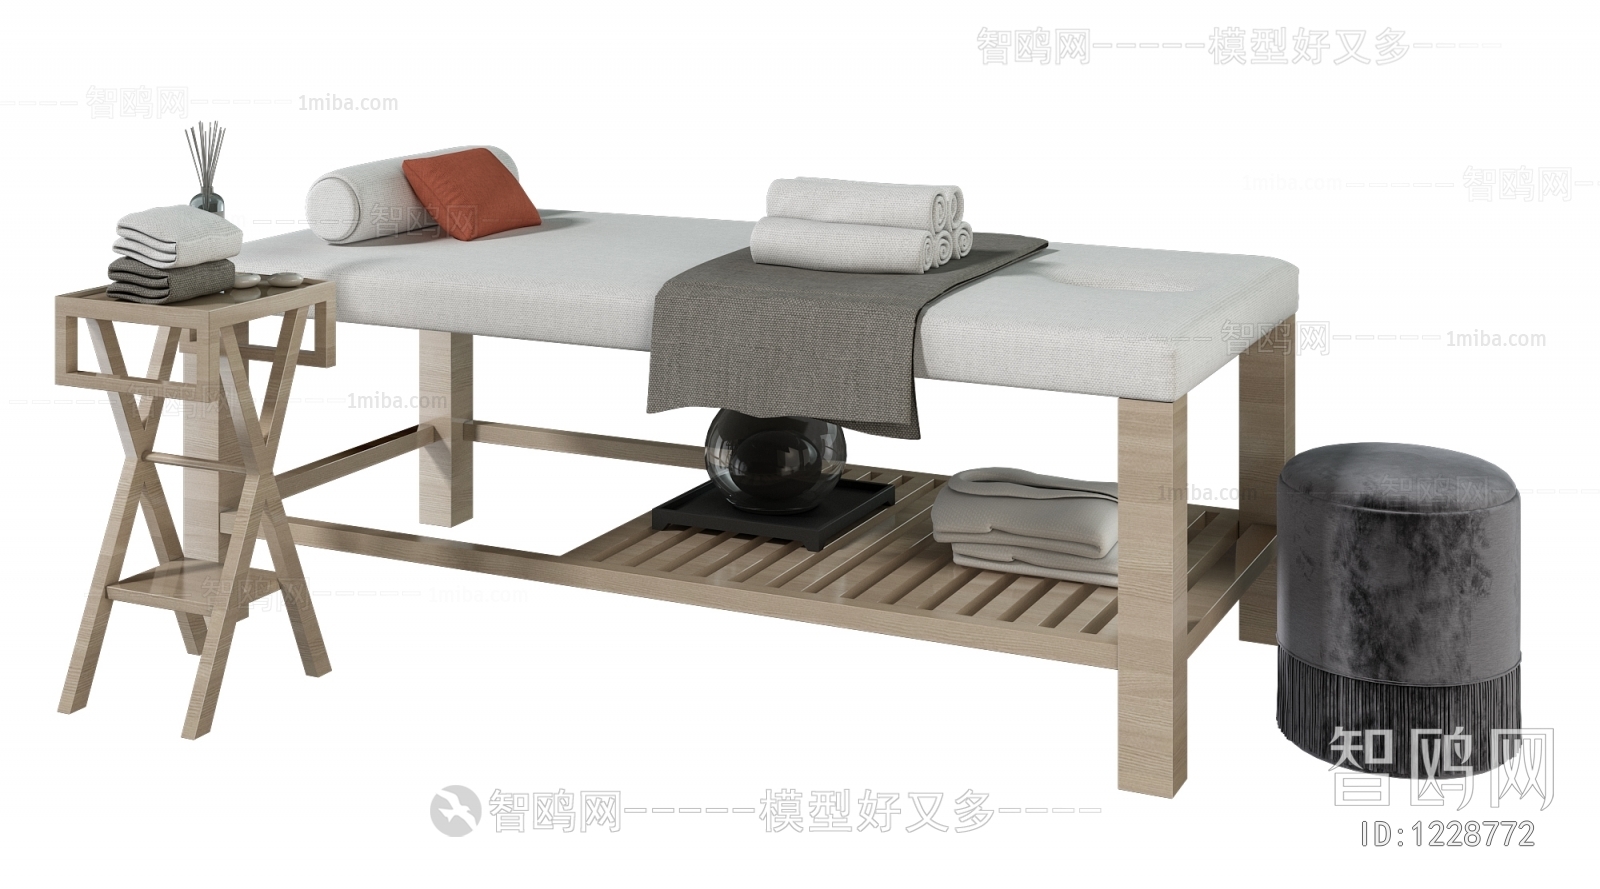 New Chinese Style Massage Table